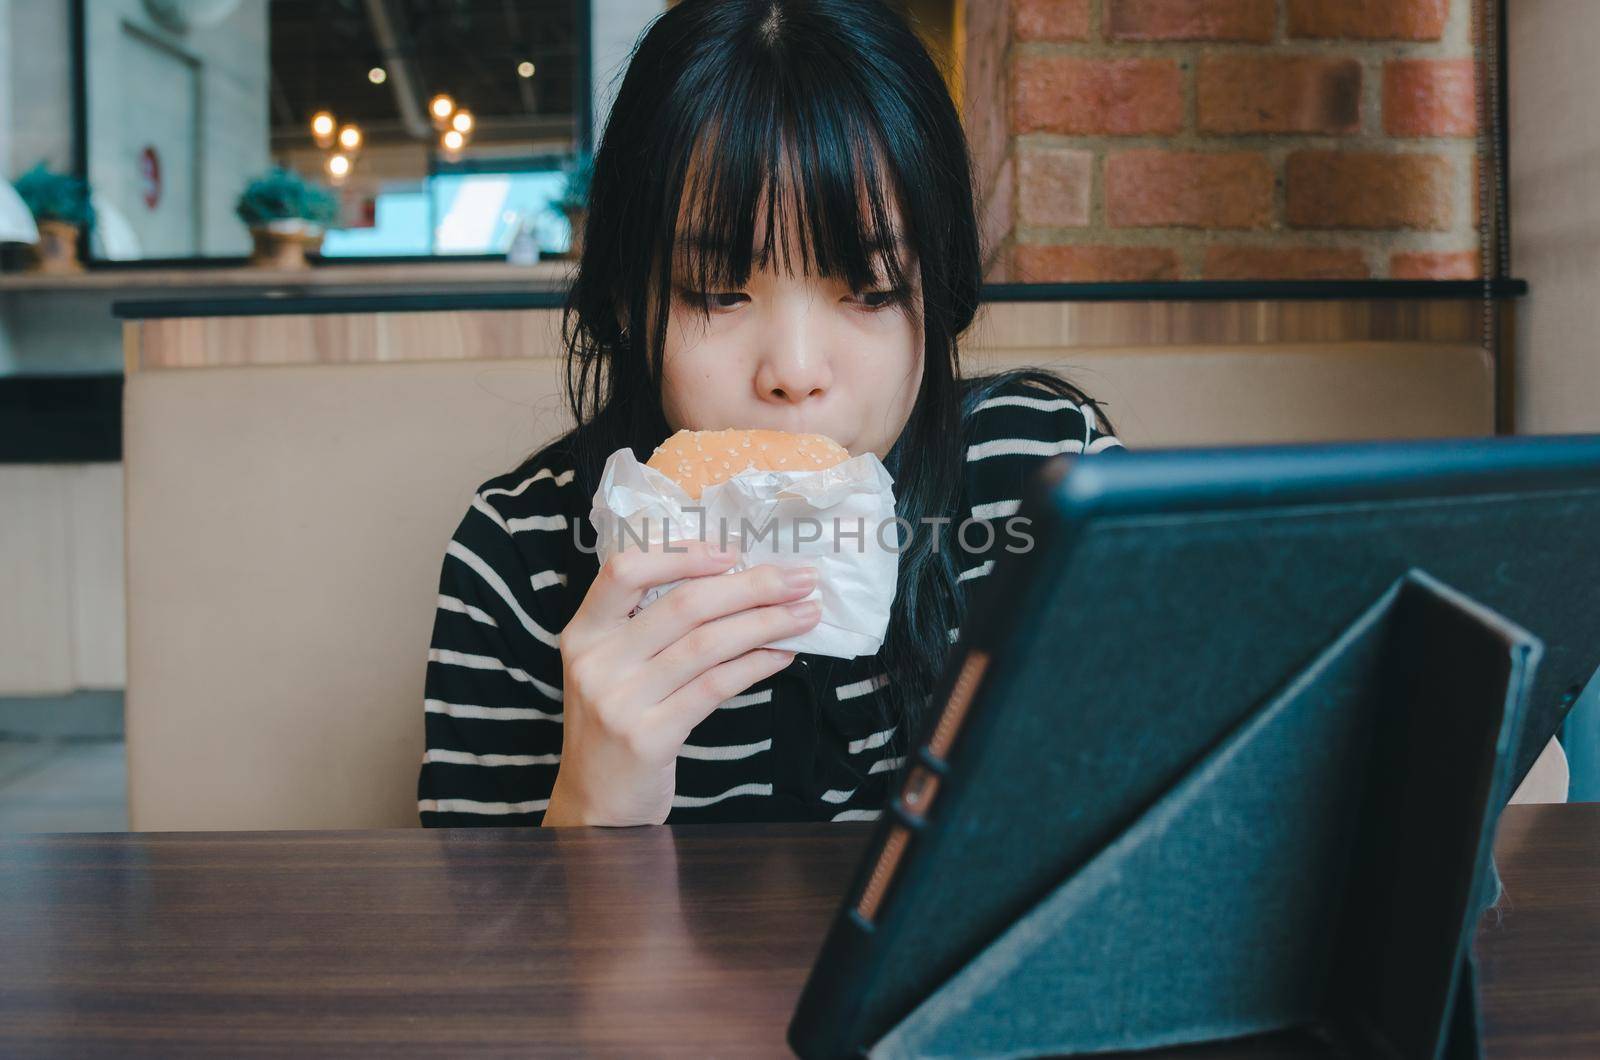 young girl is eating a hamburger and watching an online social media tech tablet on the table. by aoo3771